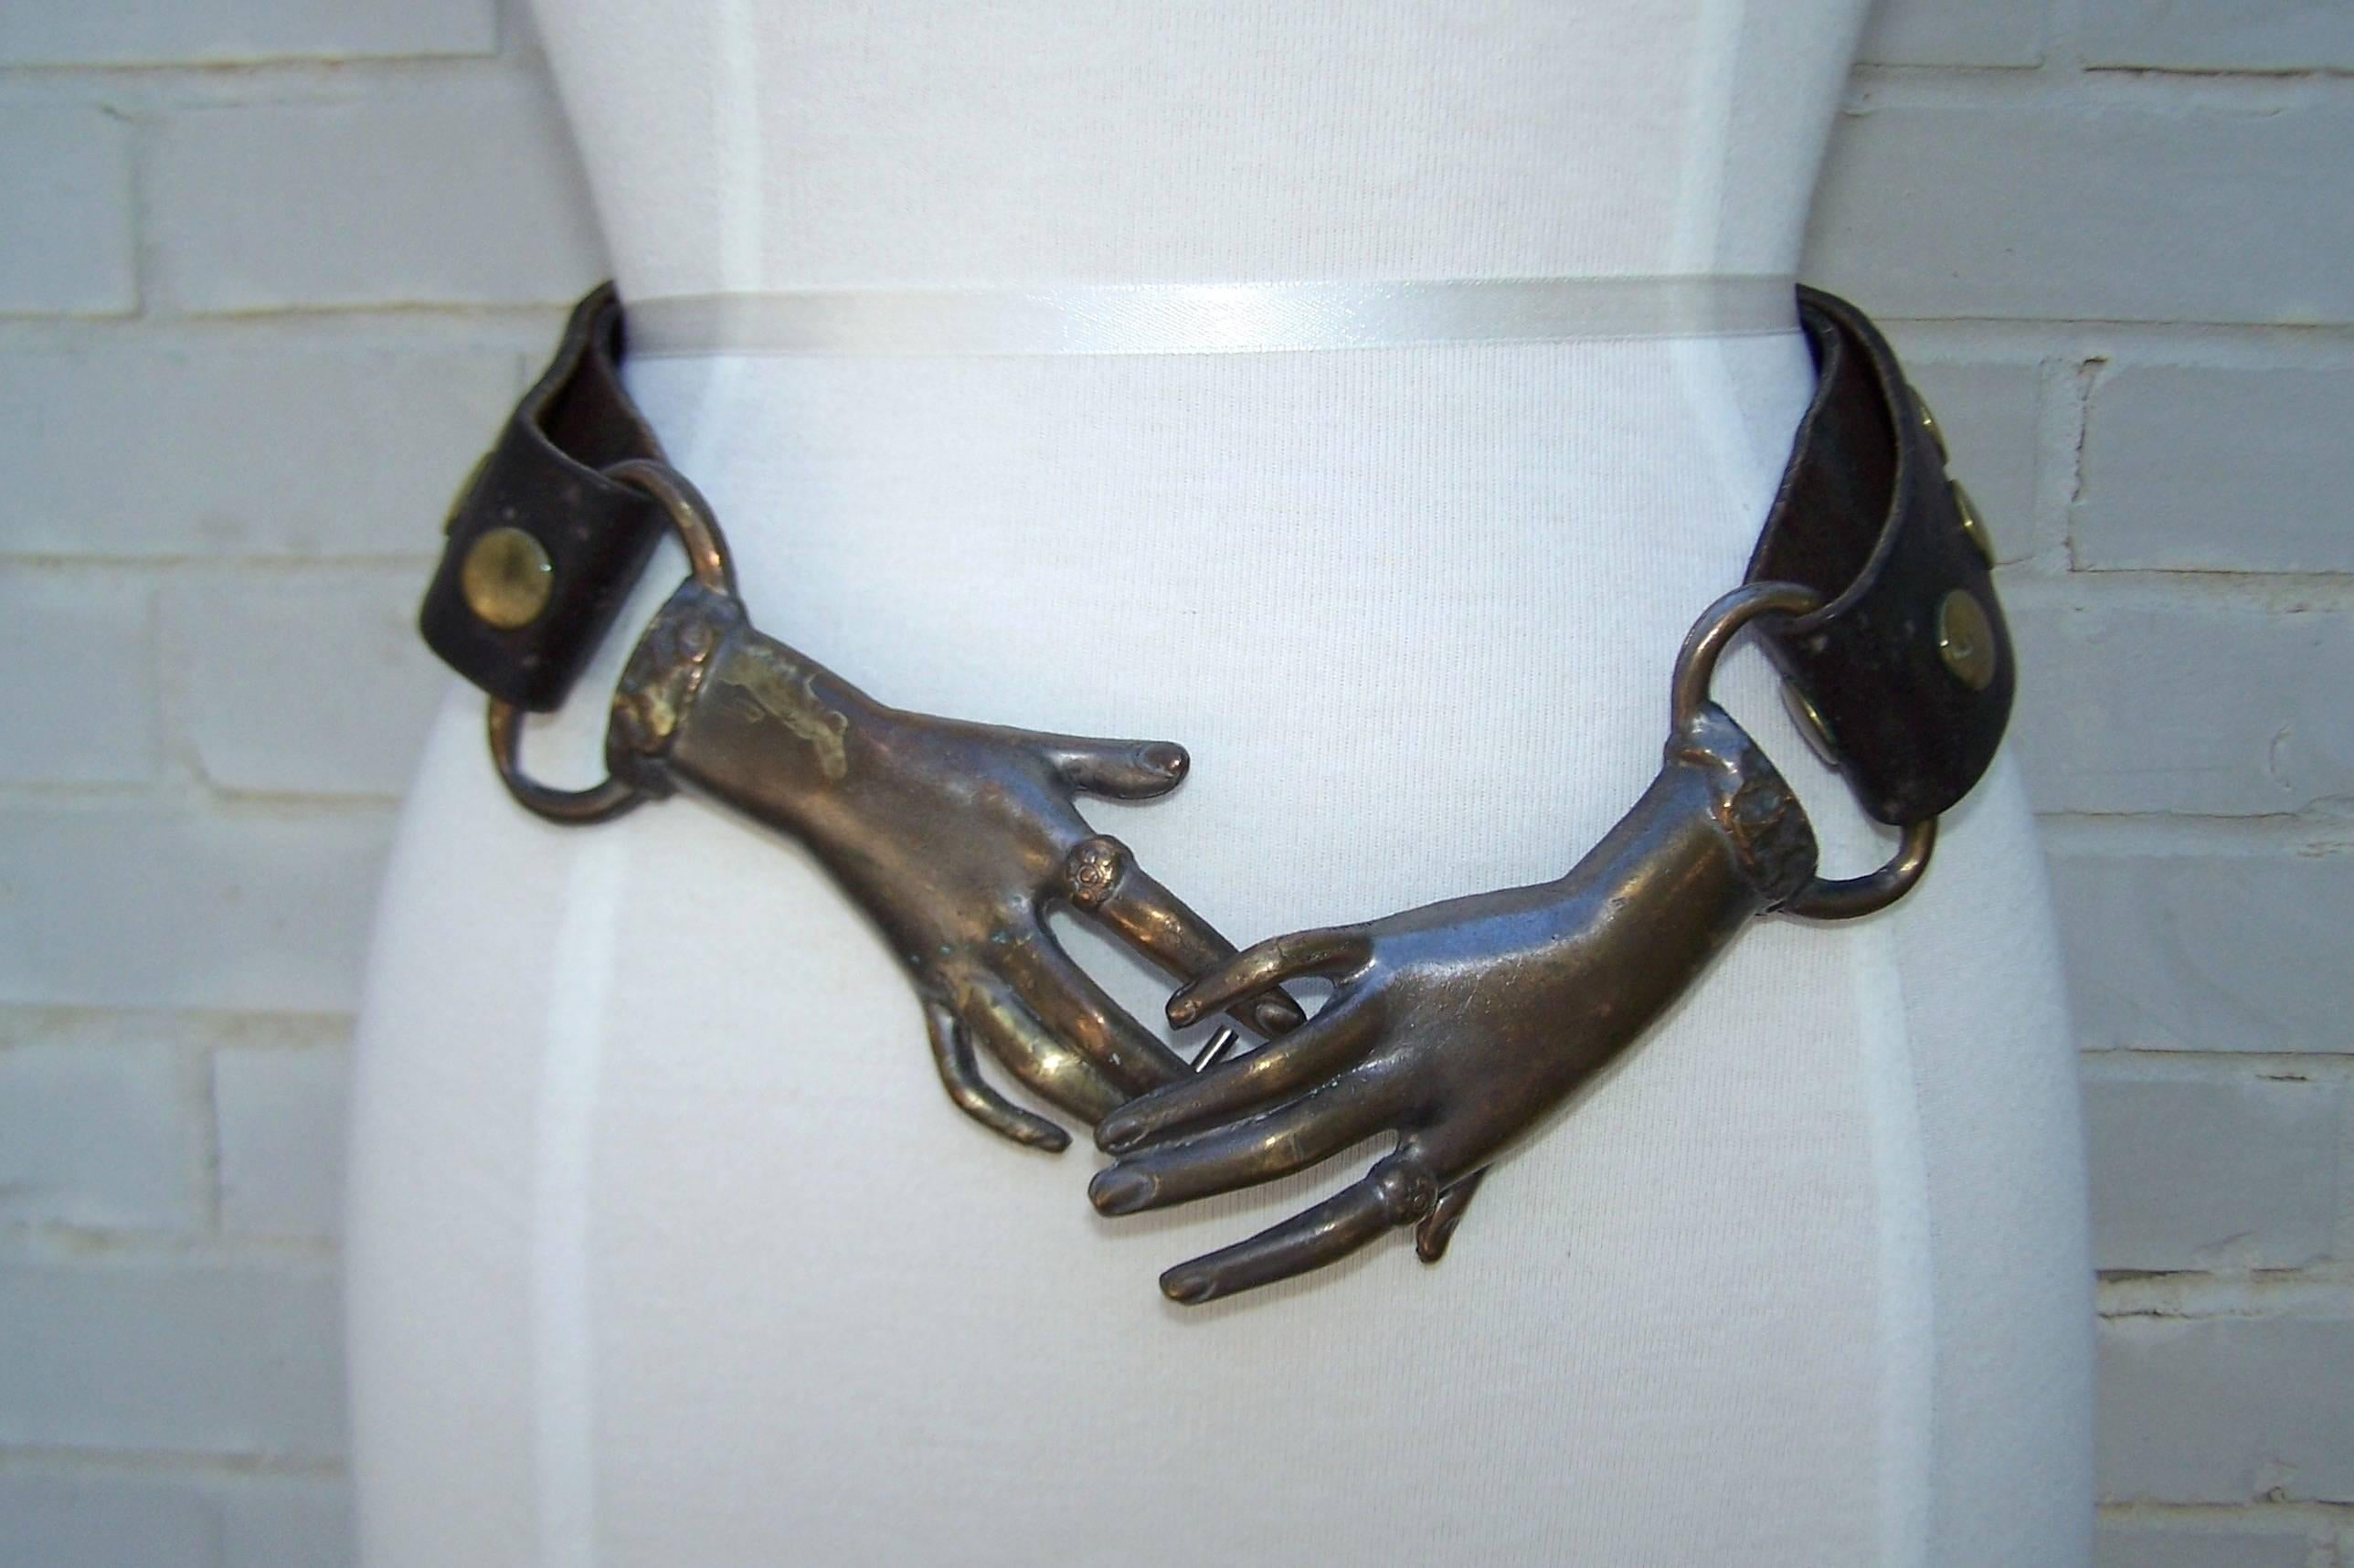 Extra hands have long been a favorite motif for fashion designers over the years including Elsa Schiaparelli.  This 1970s version is a pair of Victorian style clasping metal hands with an antiqued brass finish supporting a chunky dark brown leather